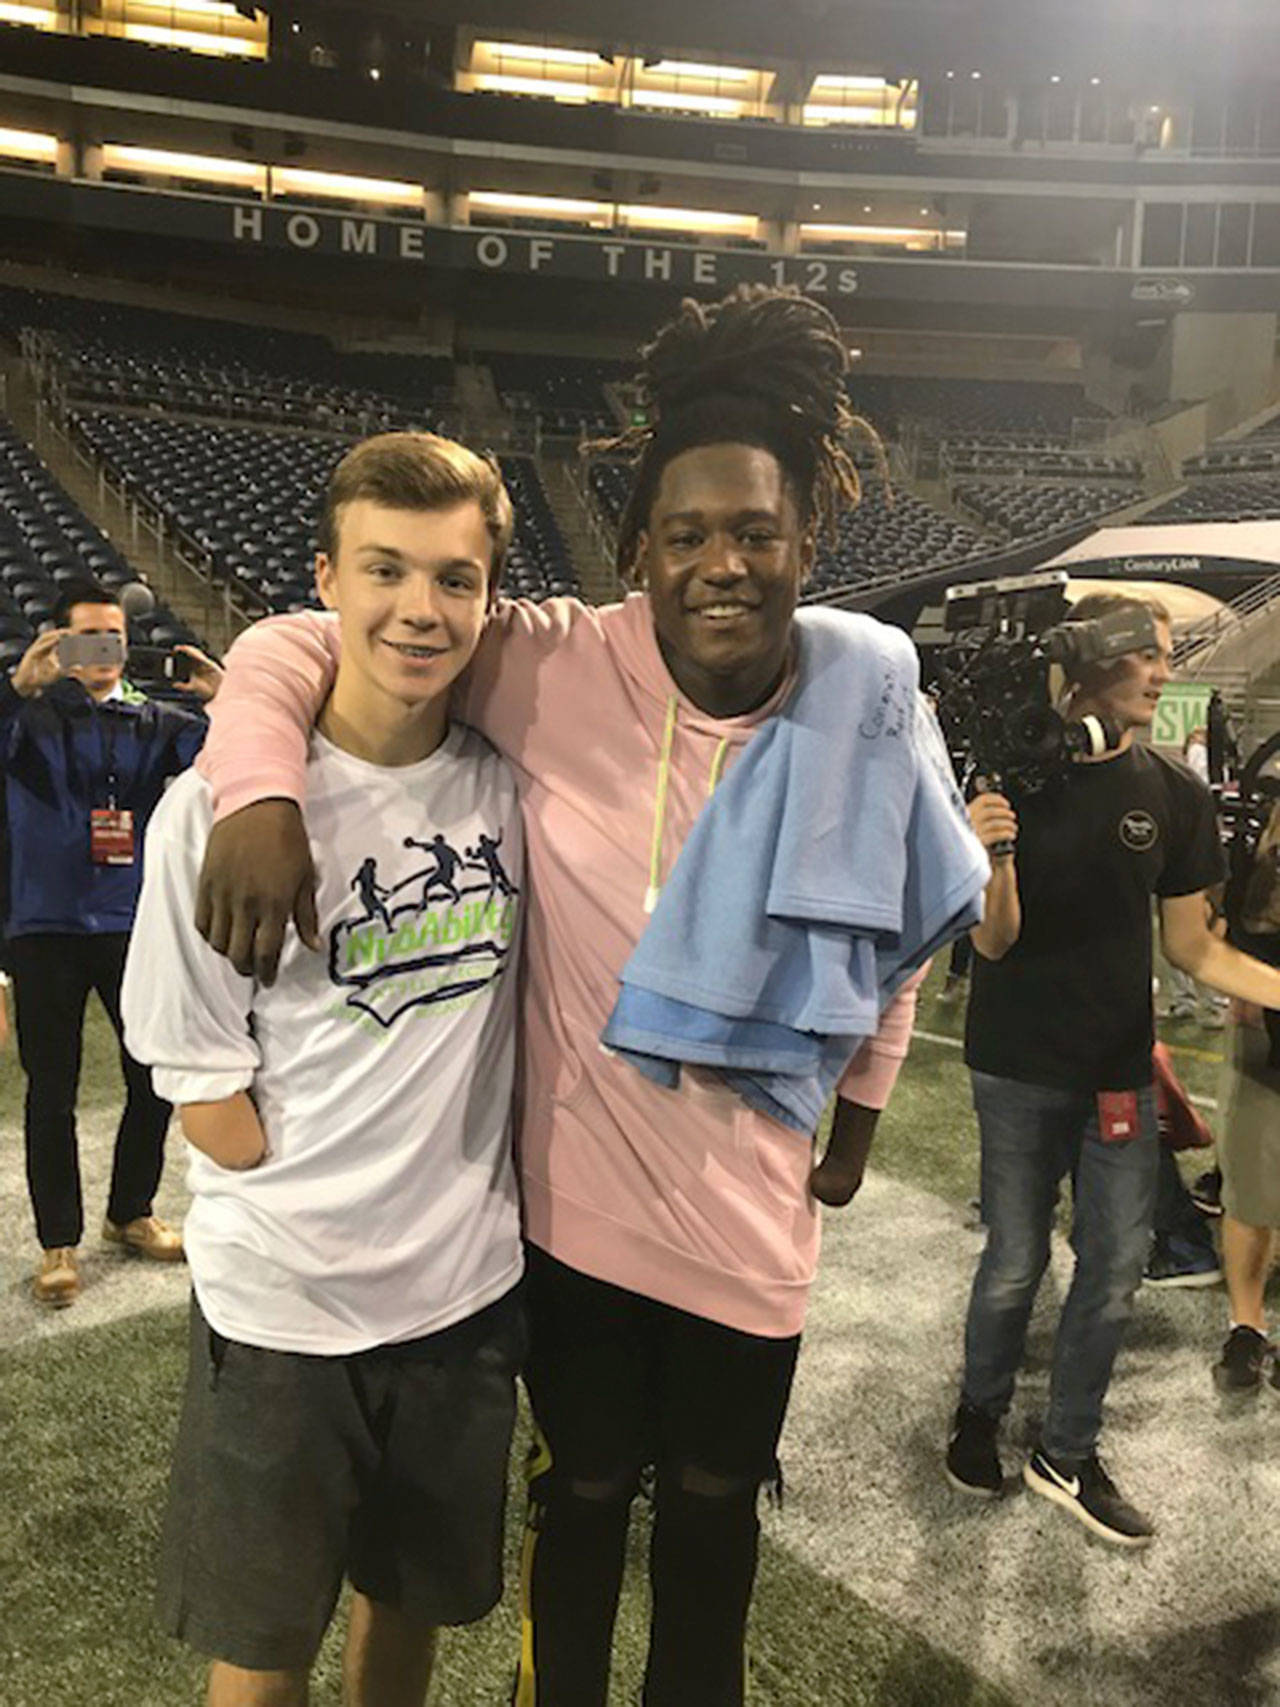 Mercer Islander Chris Givan meets Shaquem Griffin on Aug. 30. Photo courtesy of Laurie Givan